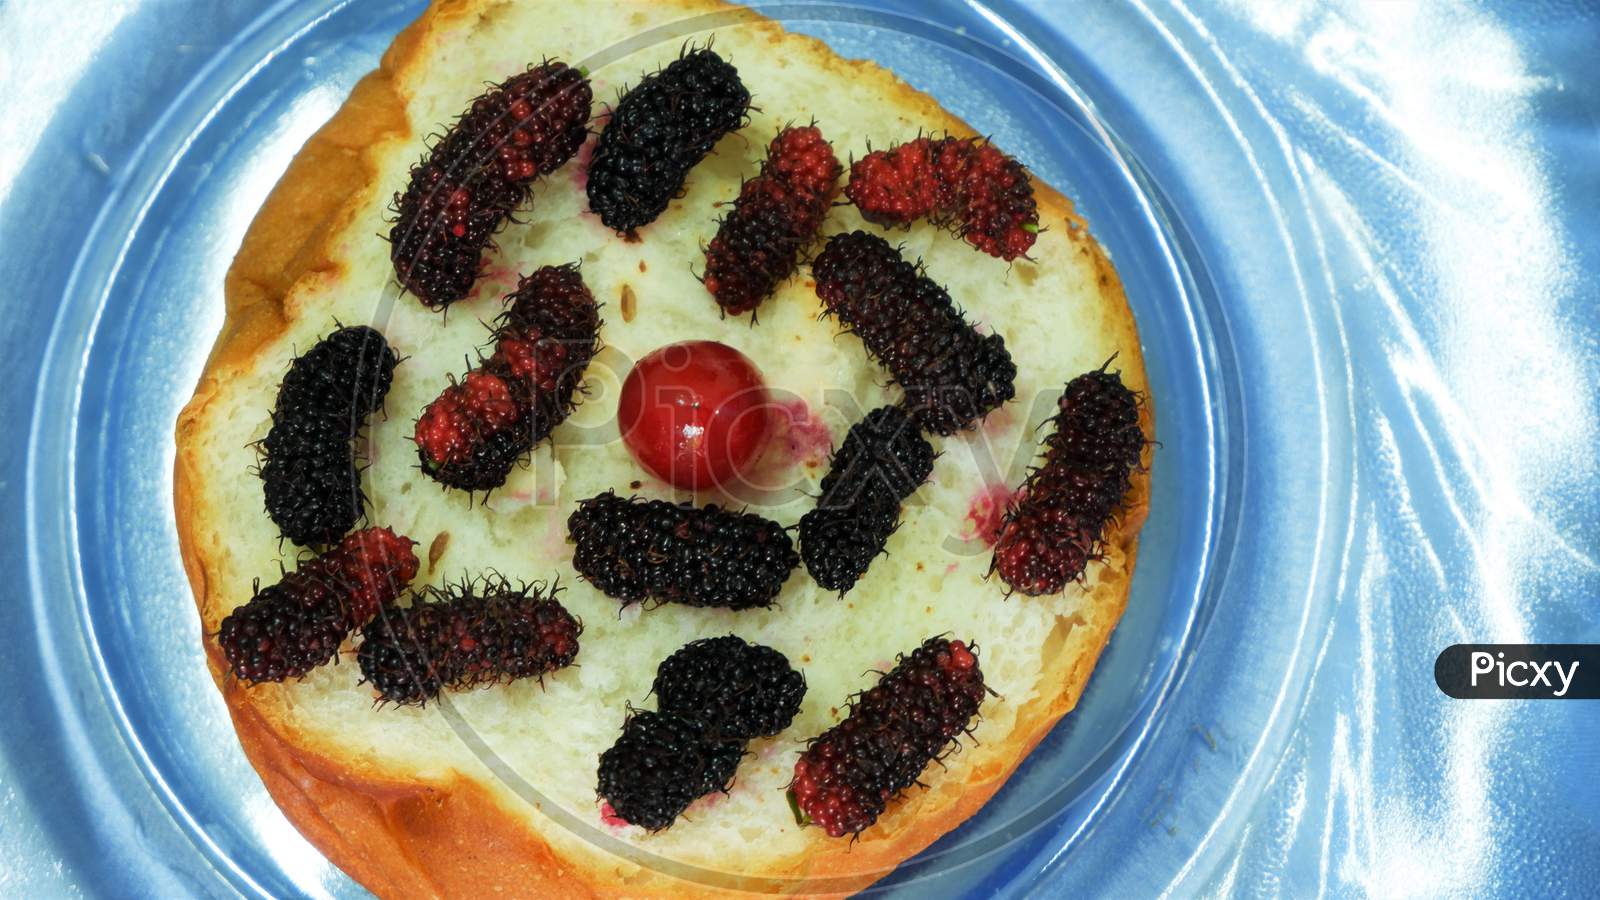 bread with mulberry